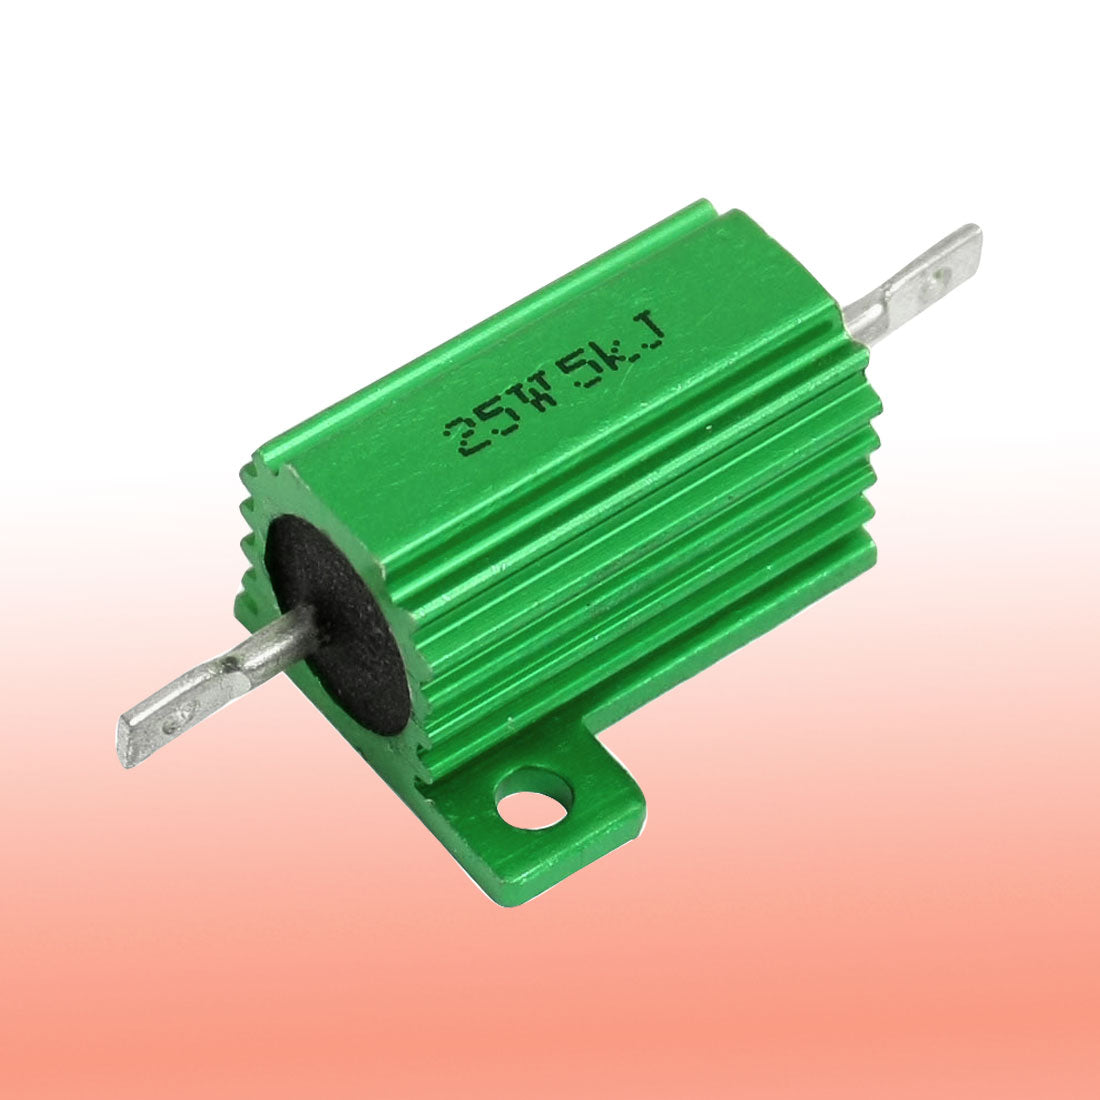 uxcell Uxcell 25W Power 5K Ohm 5% Chassis Mount Green Aluminium Clad Resistor